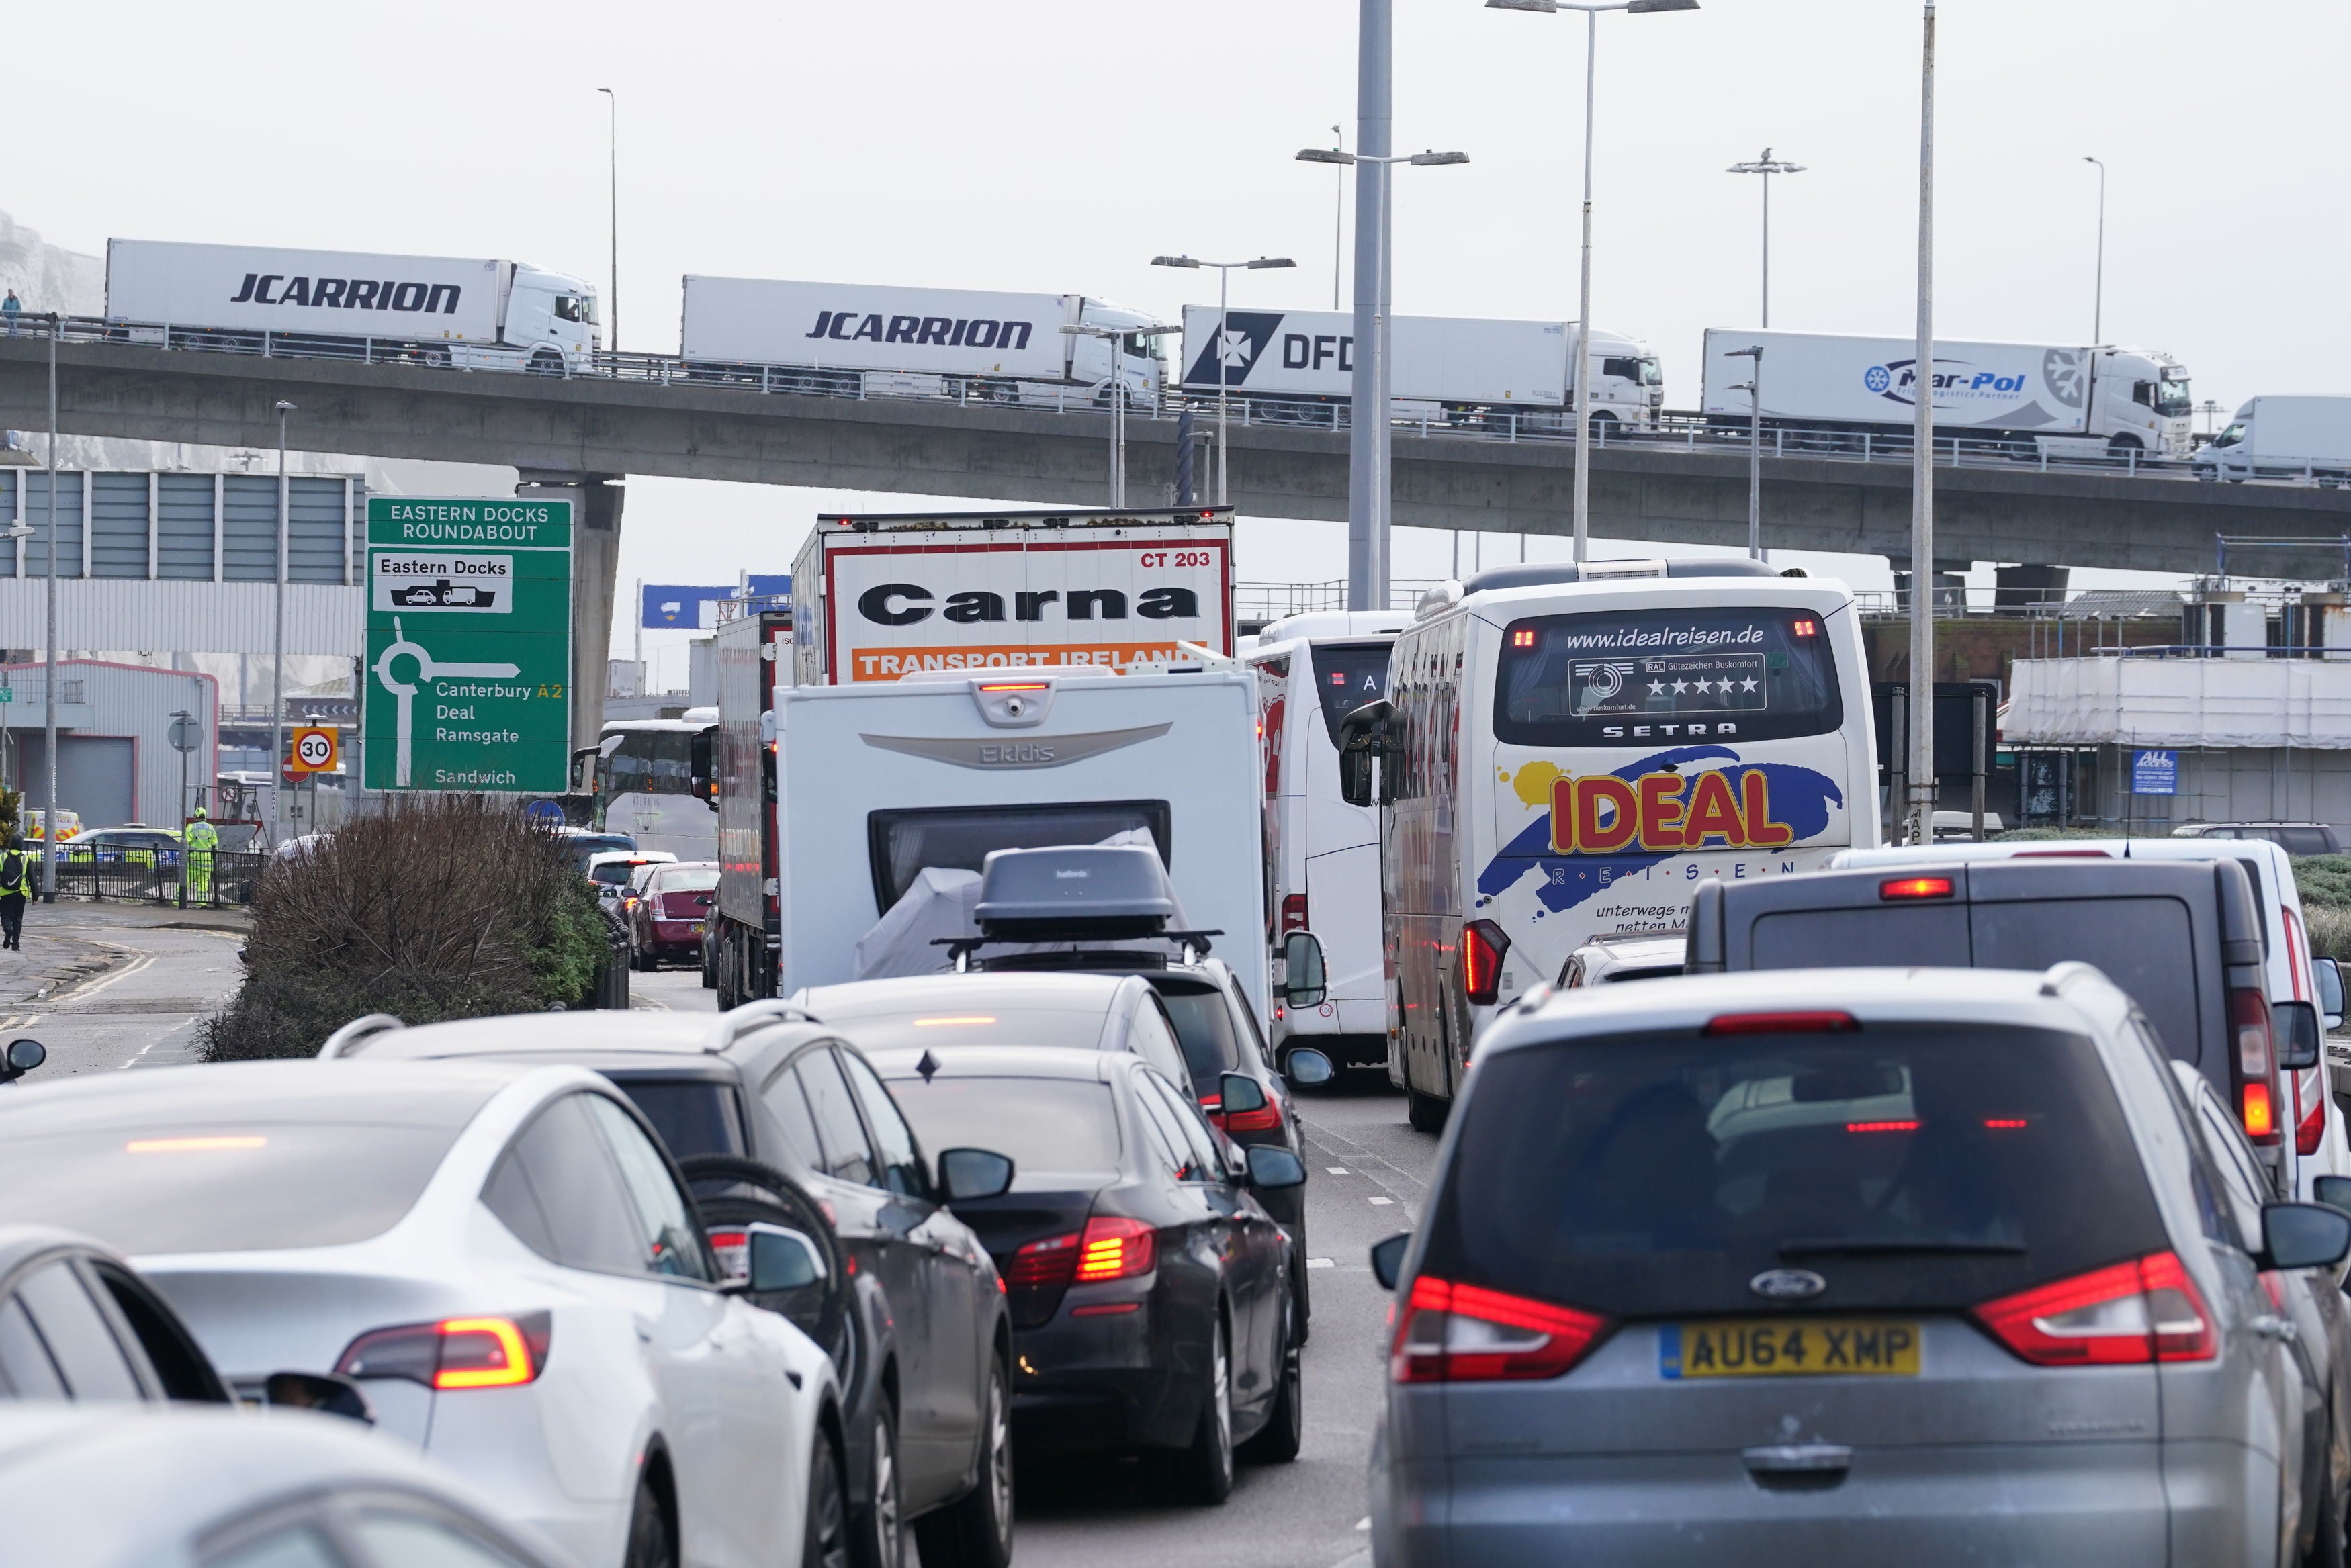 The Port of Dover has declared a critical incident